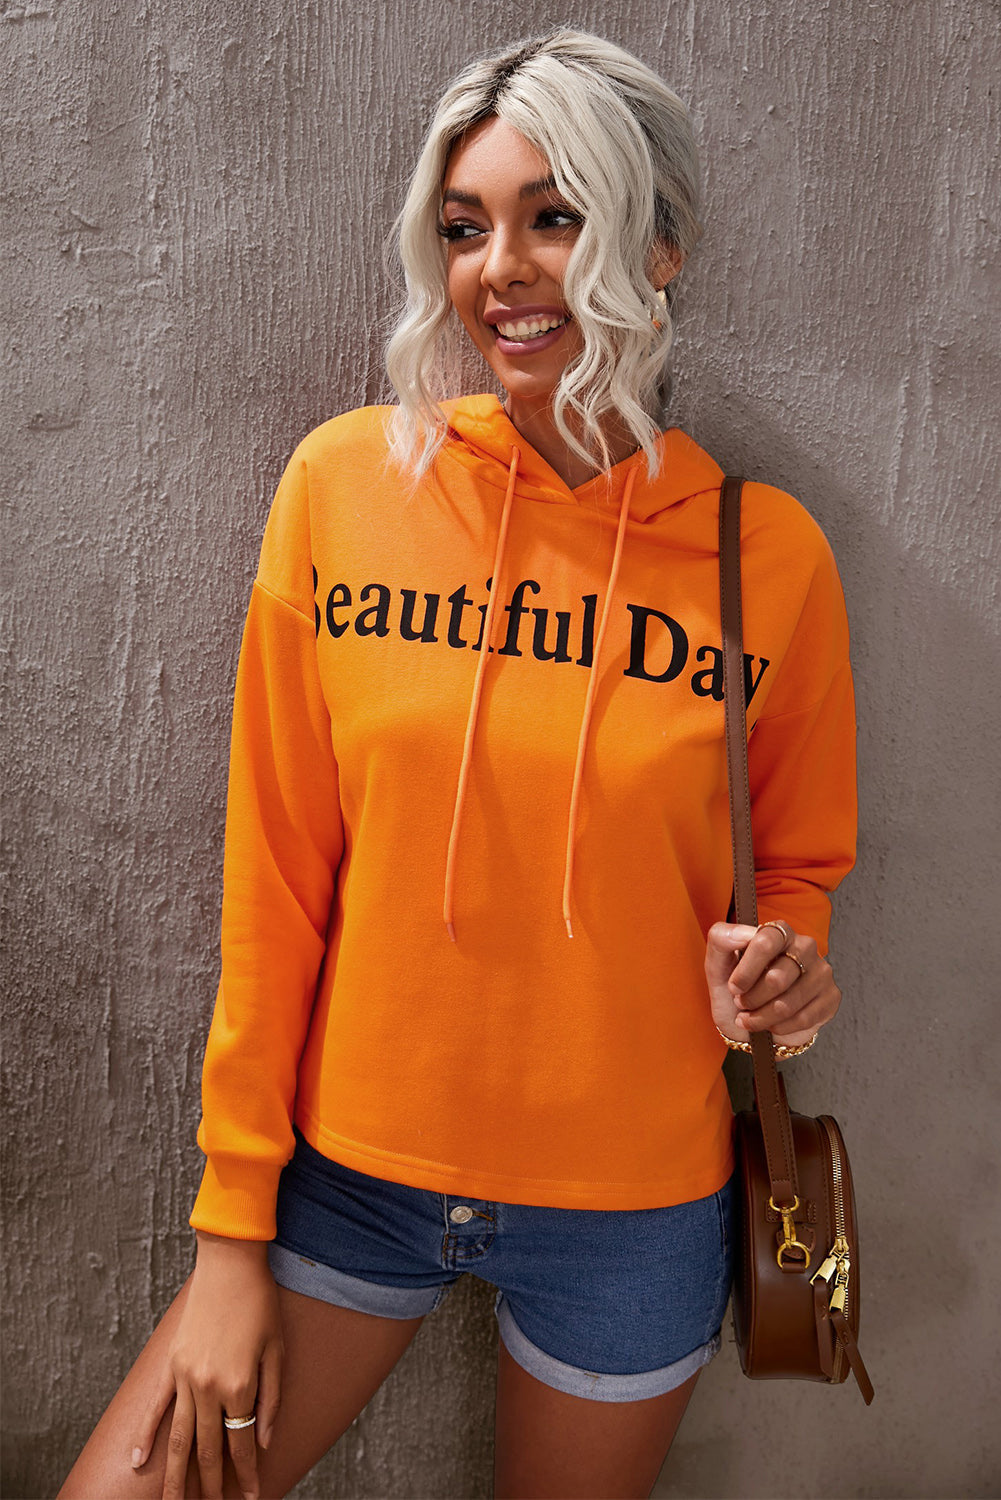 BEAUTIFUL DAY Graphic Drawstring Hoodie BLUE ZONE PLANET